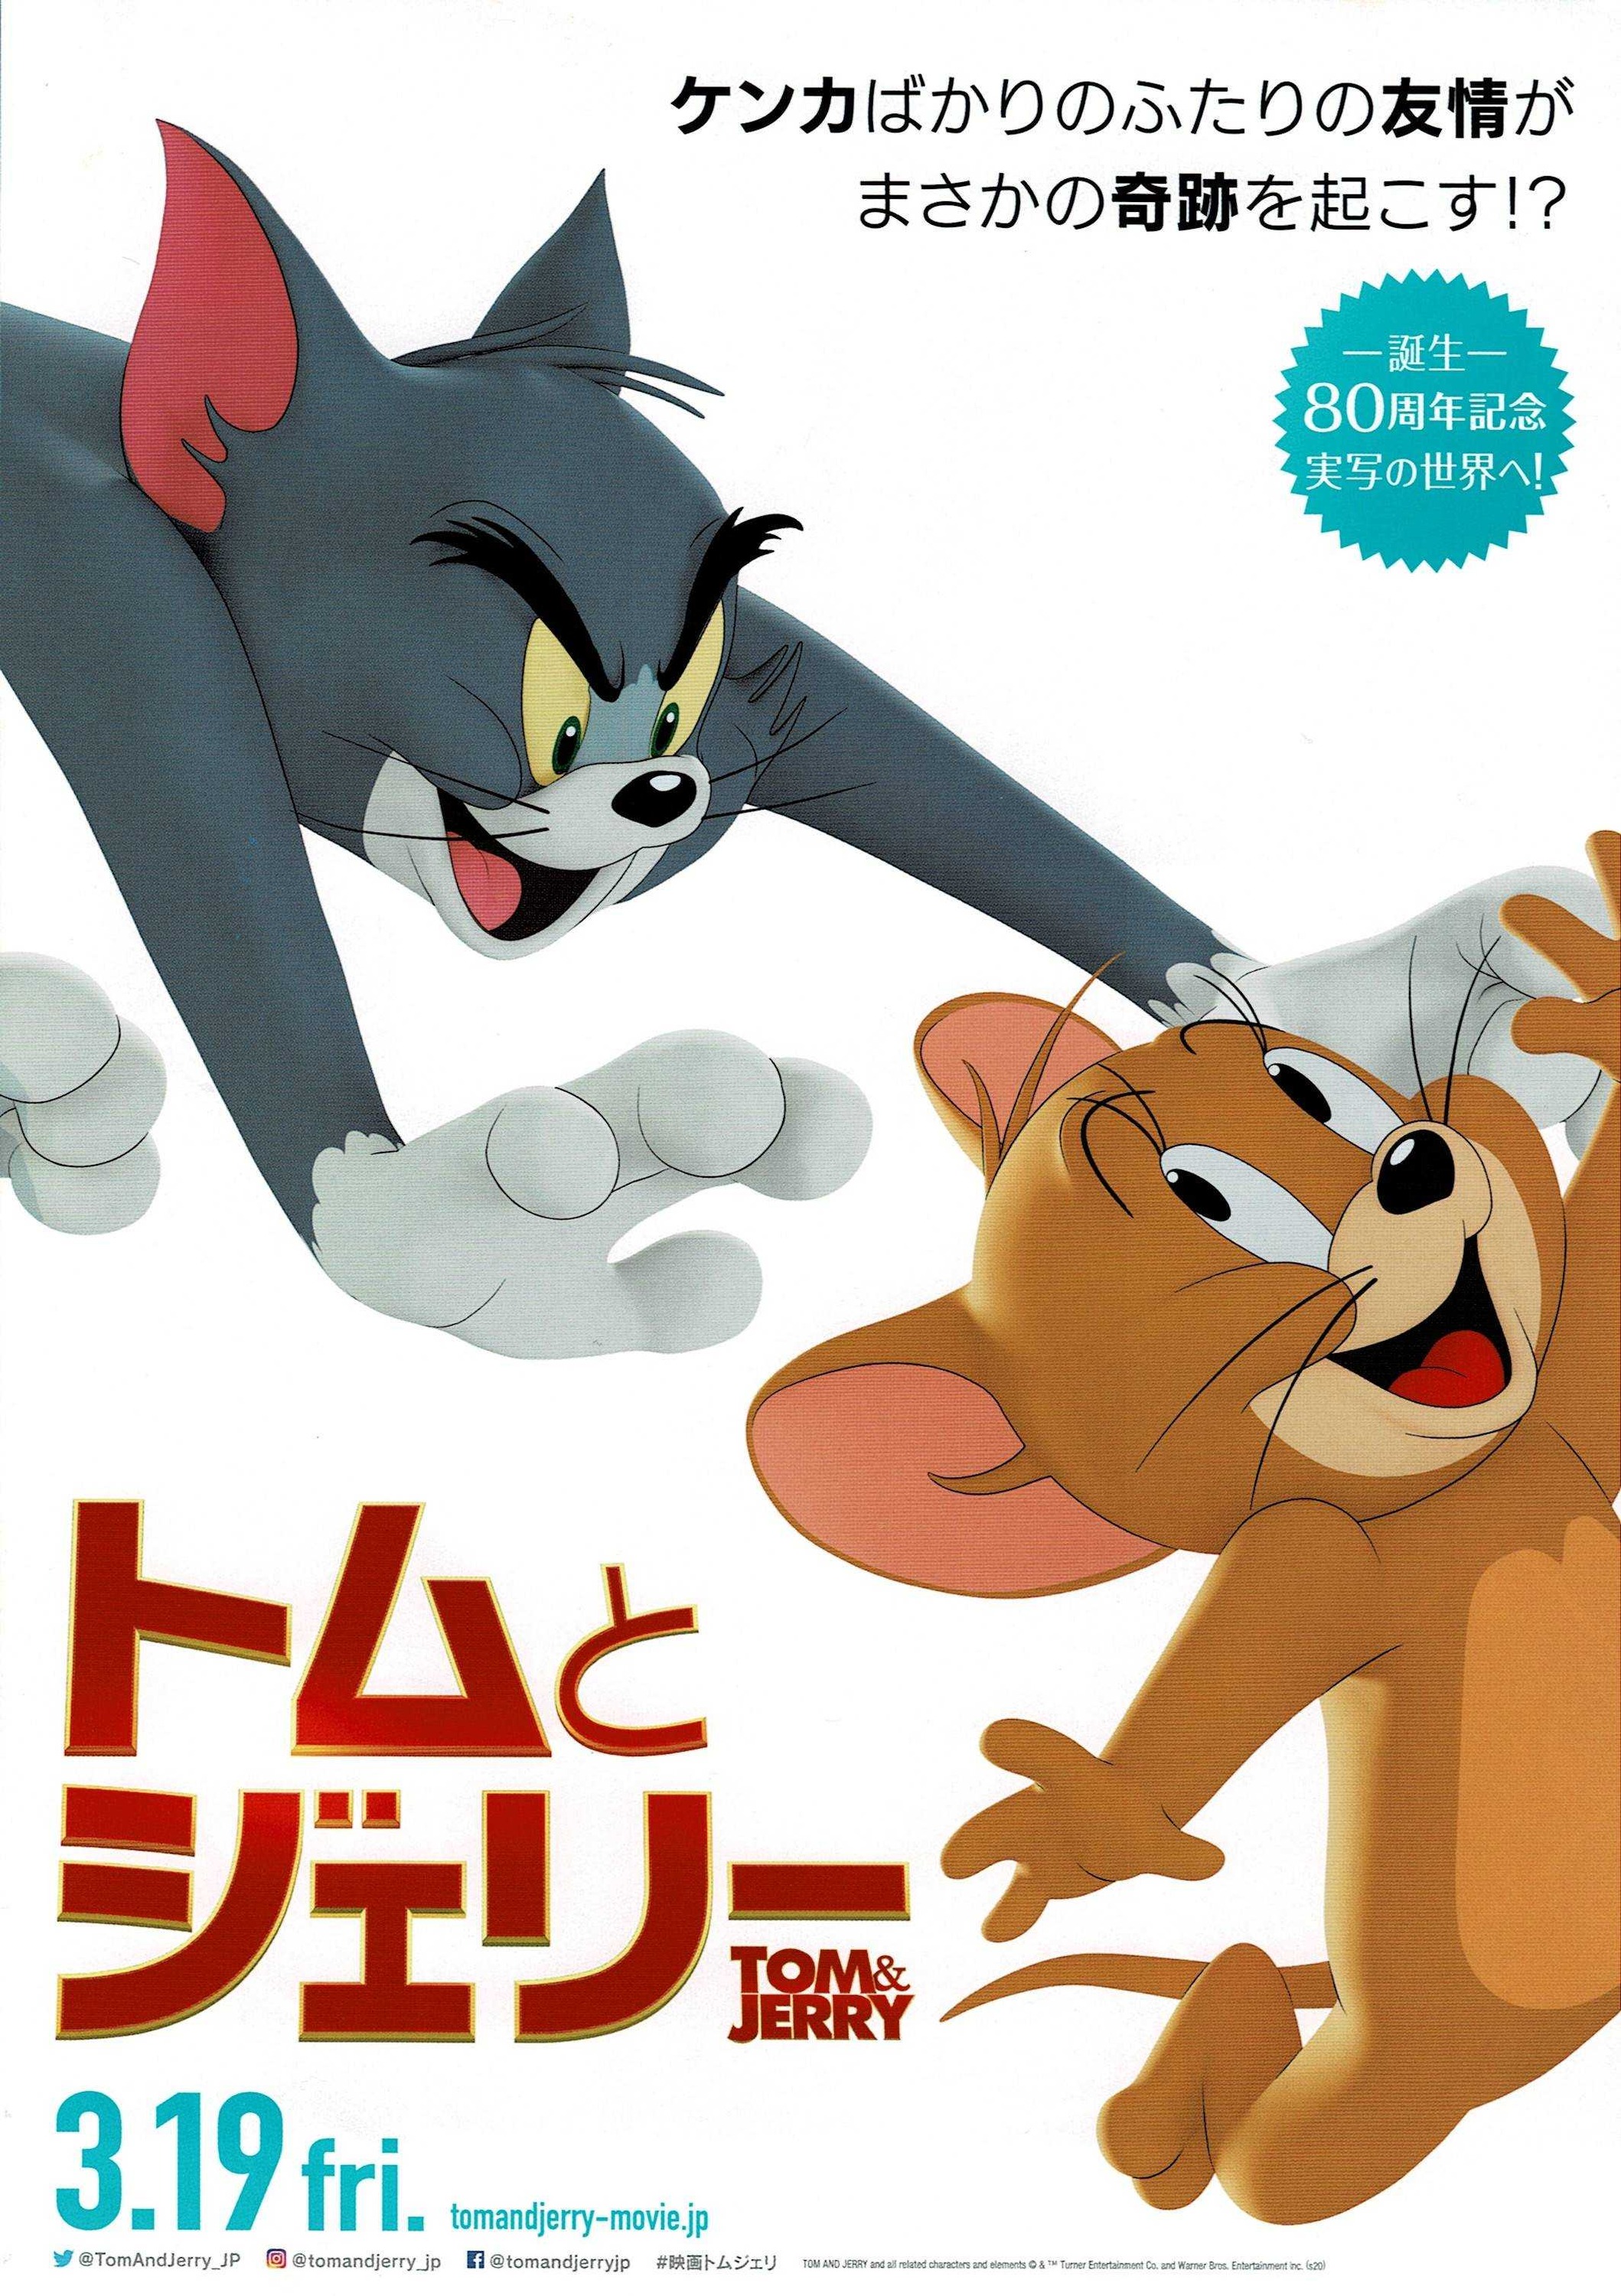 Mega Sized Movie Poster Image for Tom and Jerry (#6 of 8)